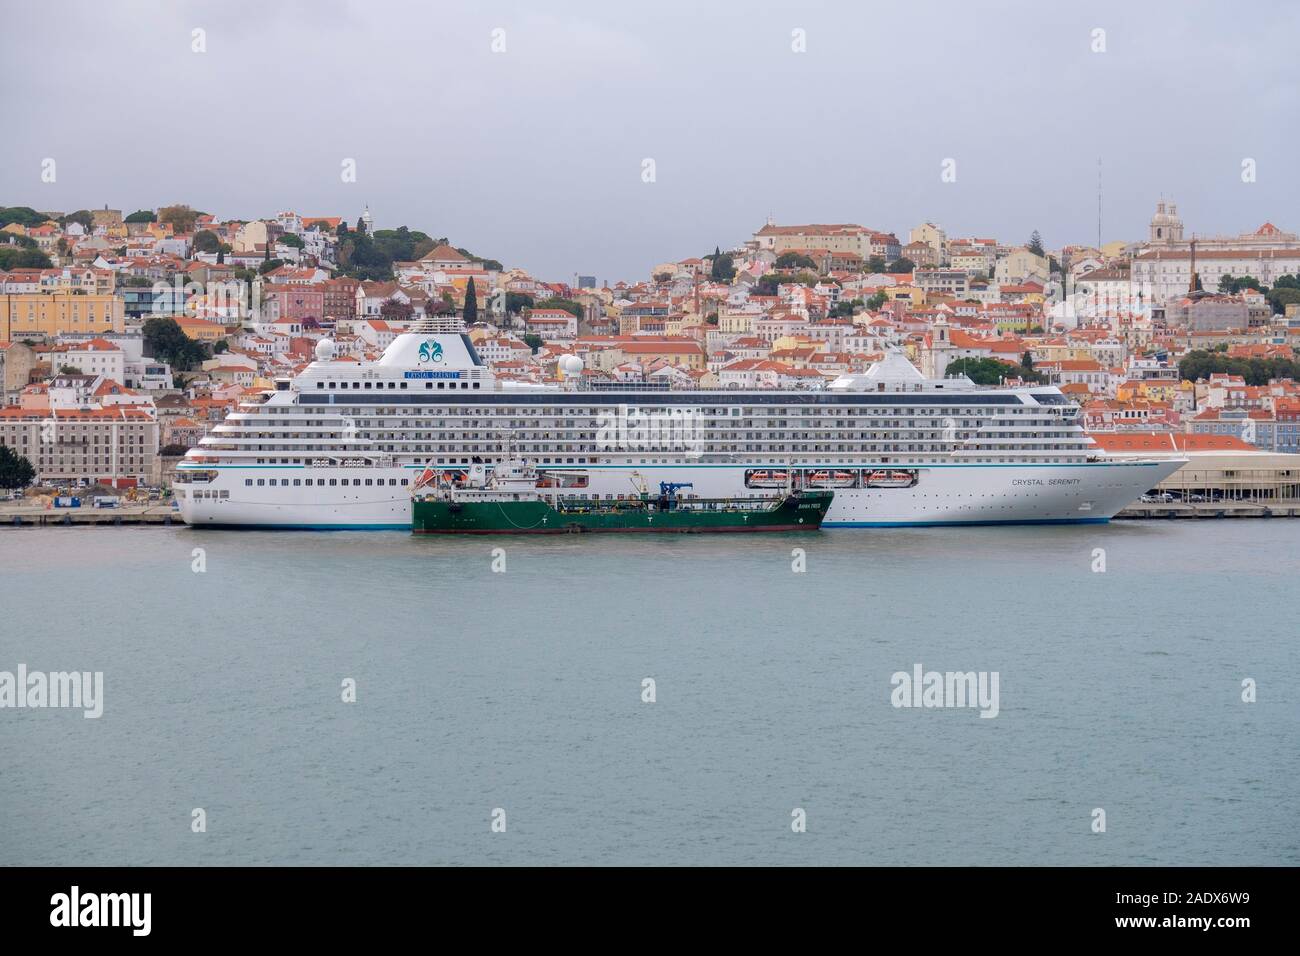 Oil tanker refueling the Crystal Serenity cruise liner ship at the port of Lisbon, Portugal, Europe Stock Photo